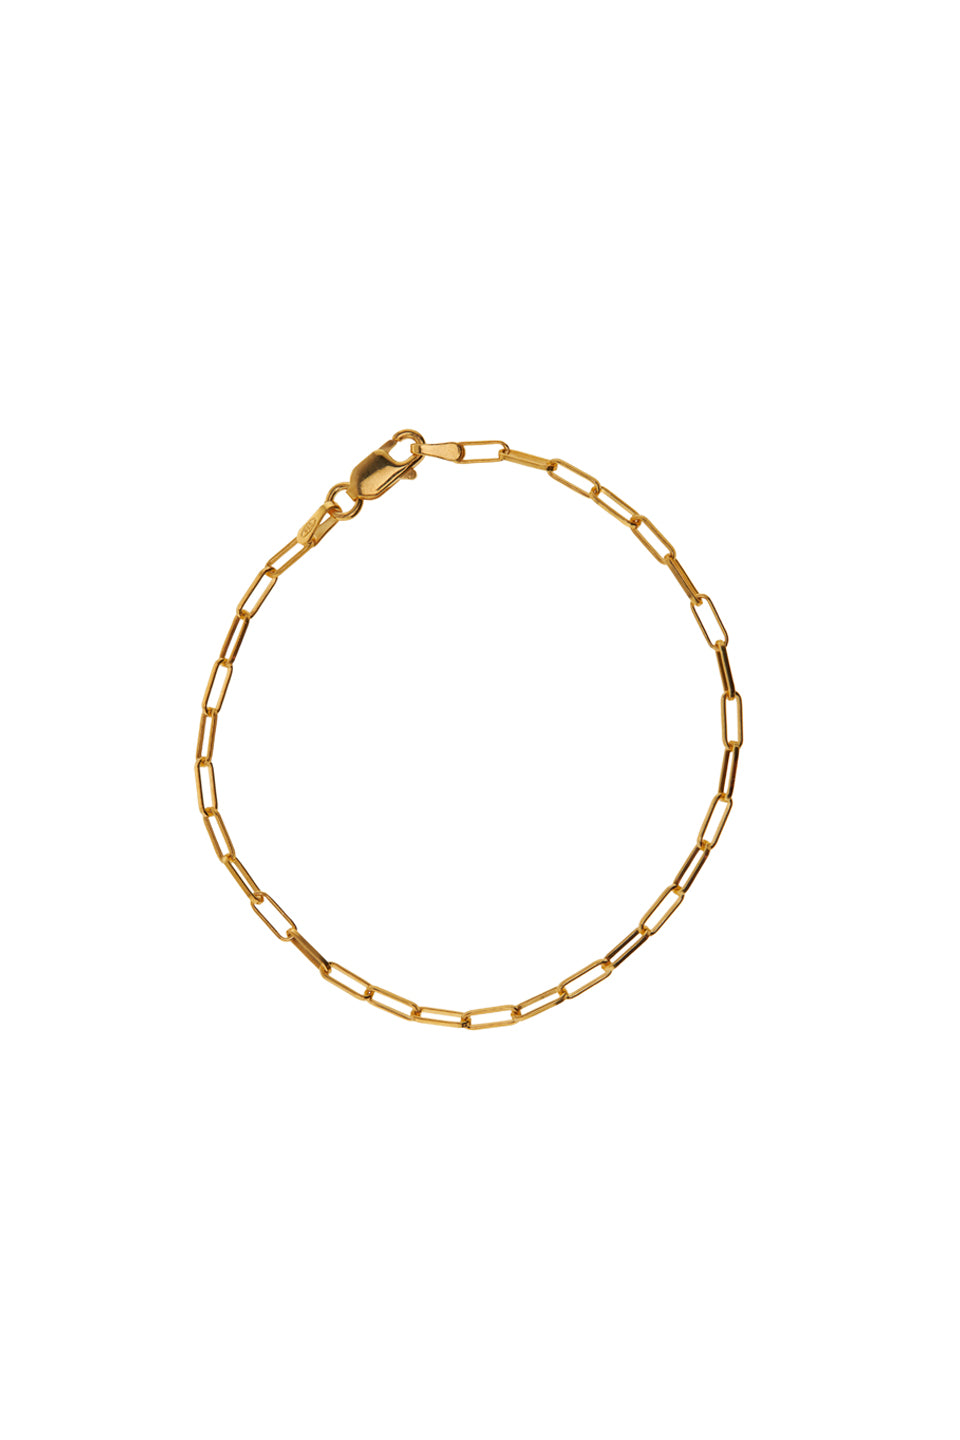 Xzota | Armbanden |  Chain square | Gold plated